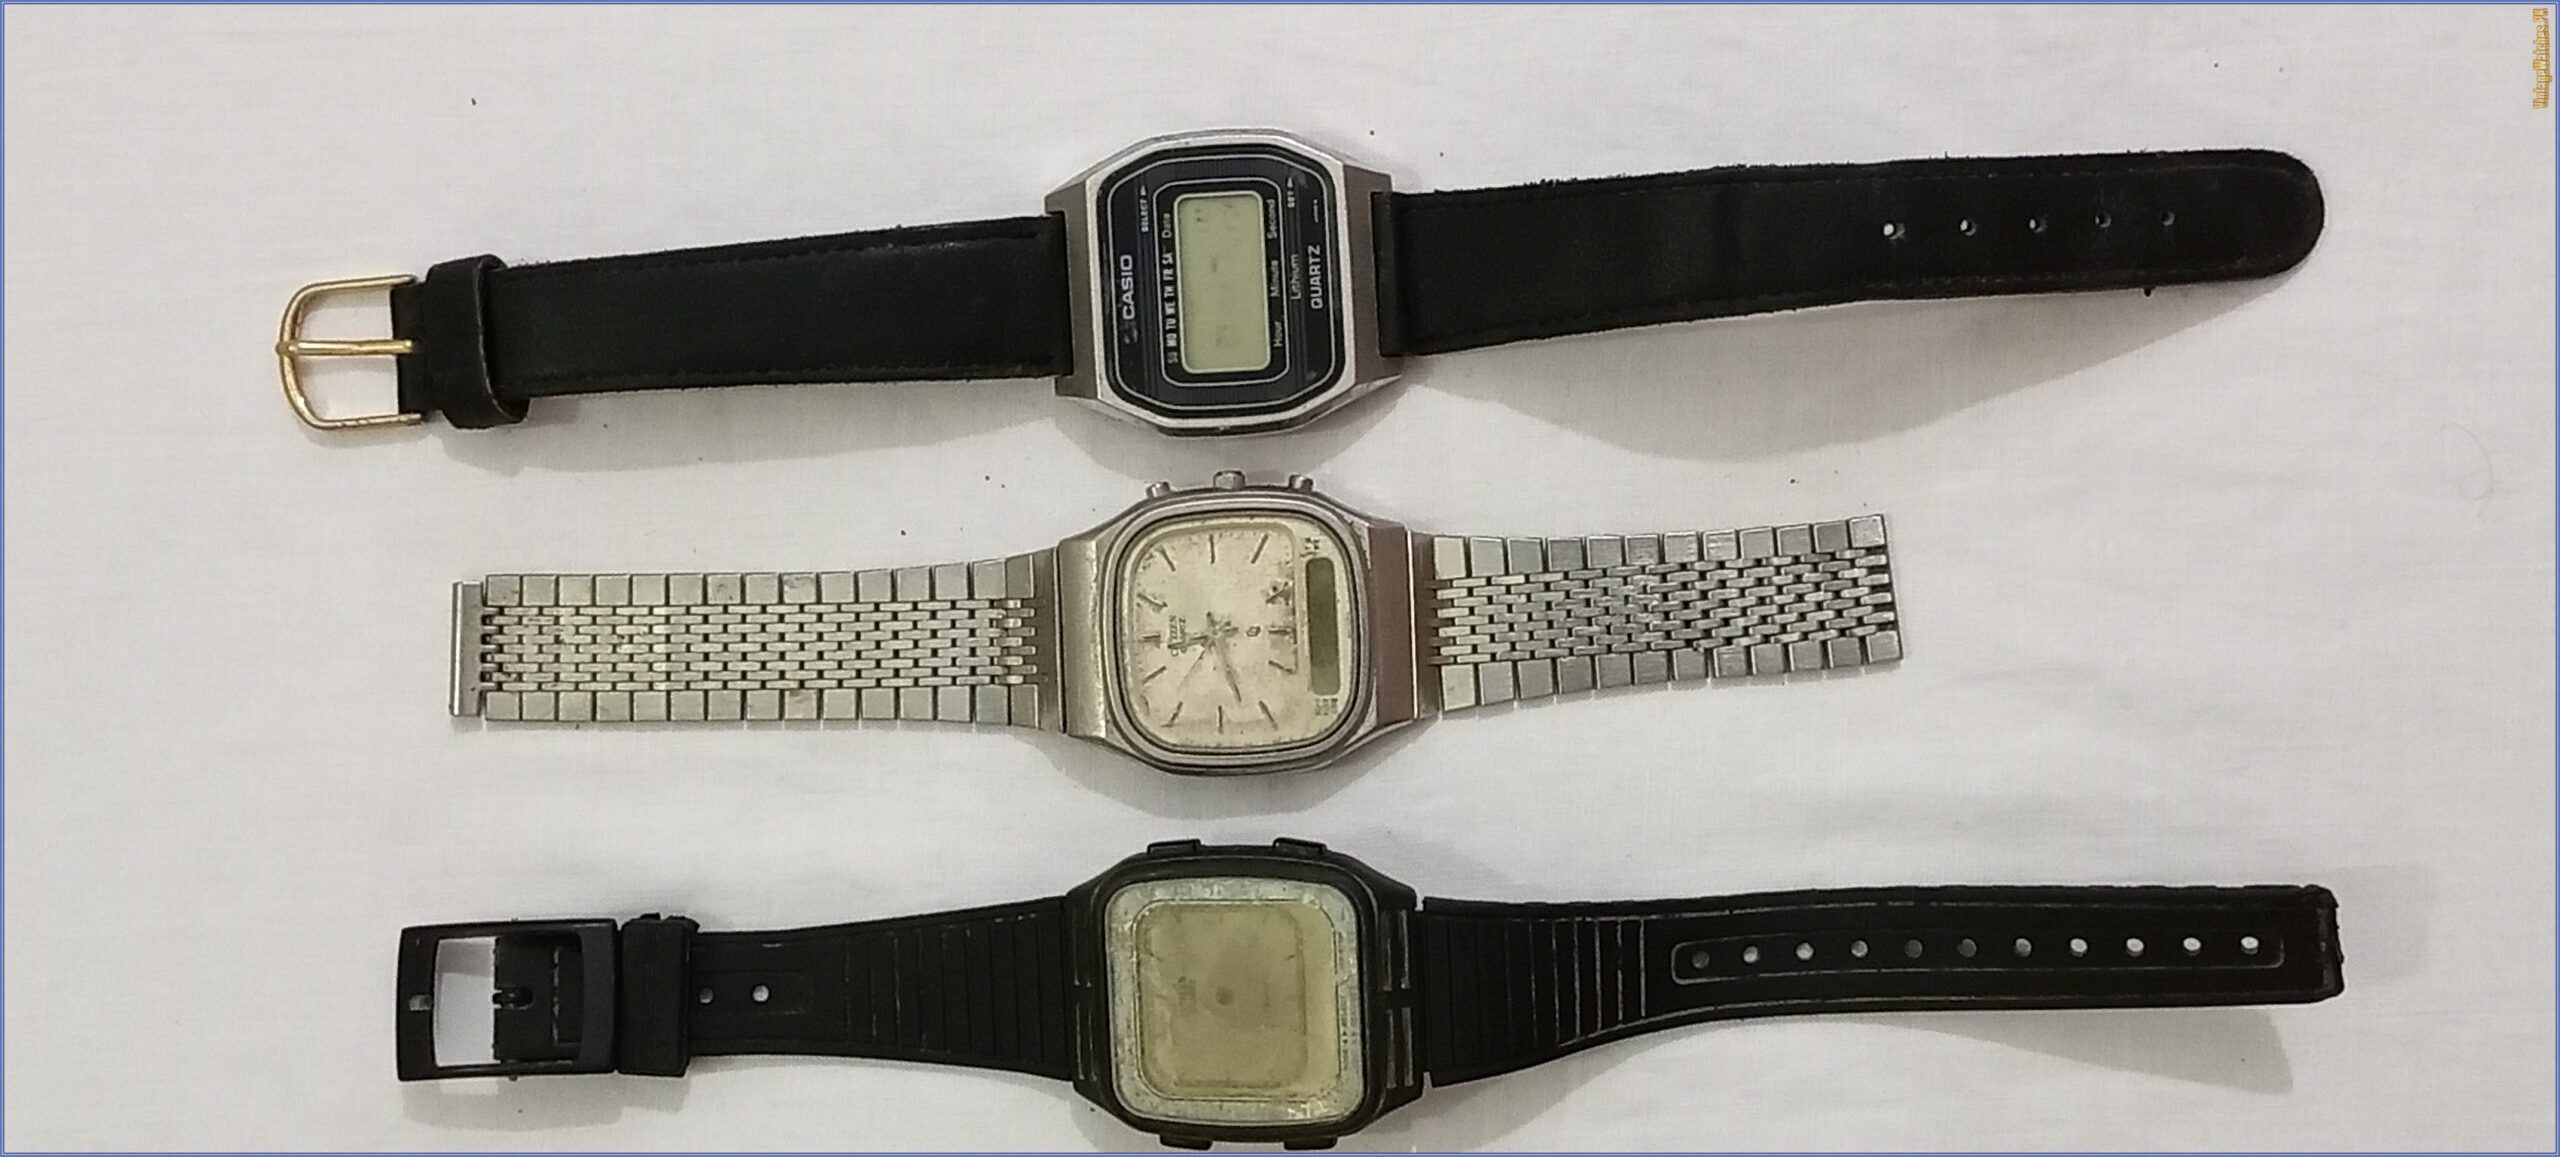 Lot 6 Original Vintage Old Classic Ana Digital Watches Casio Citizen 9570, 9560, 8950 - PK00017-IMG_20221009_191459_680-scaled-e1680171115750 - VintageWatches.PK